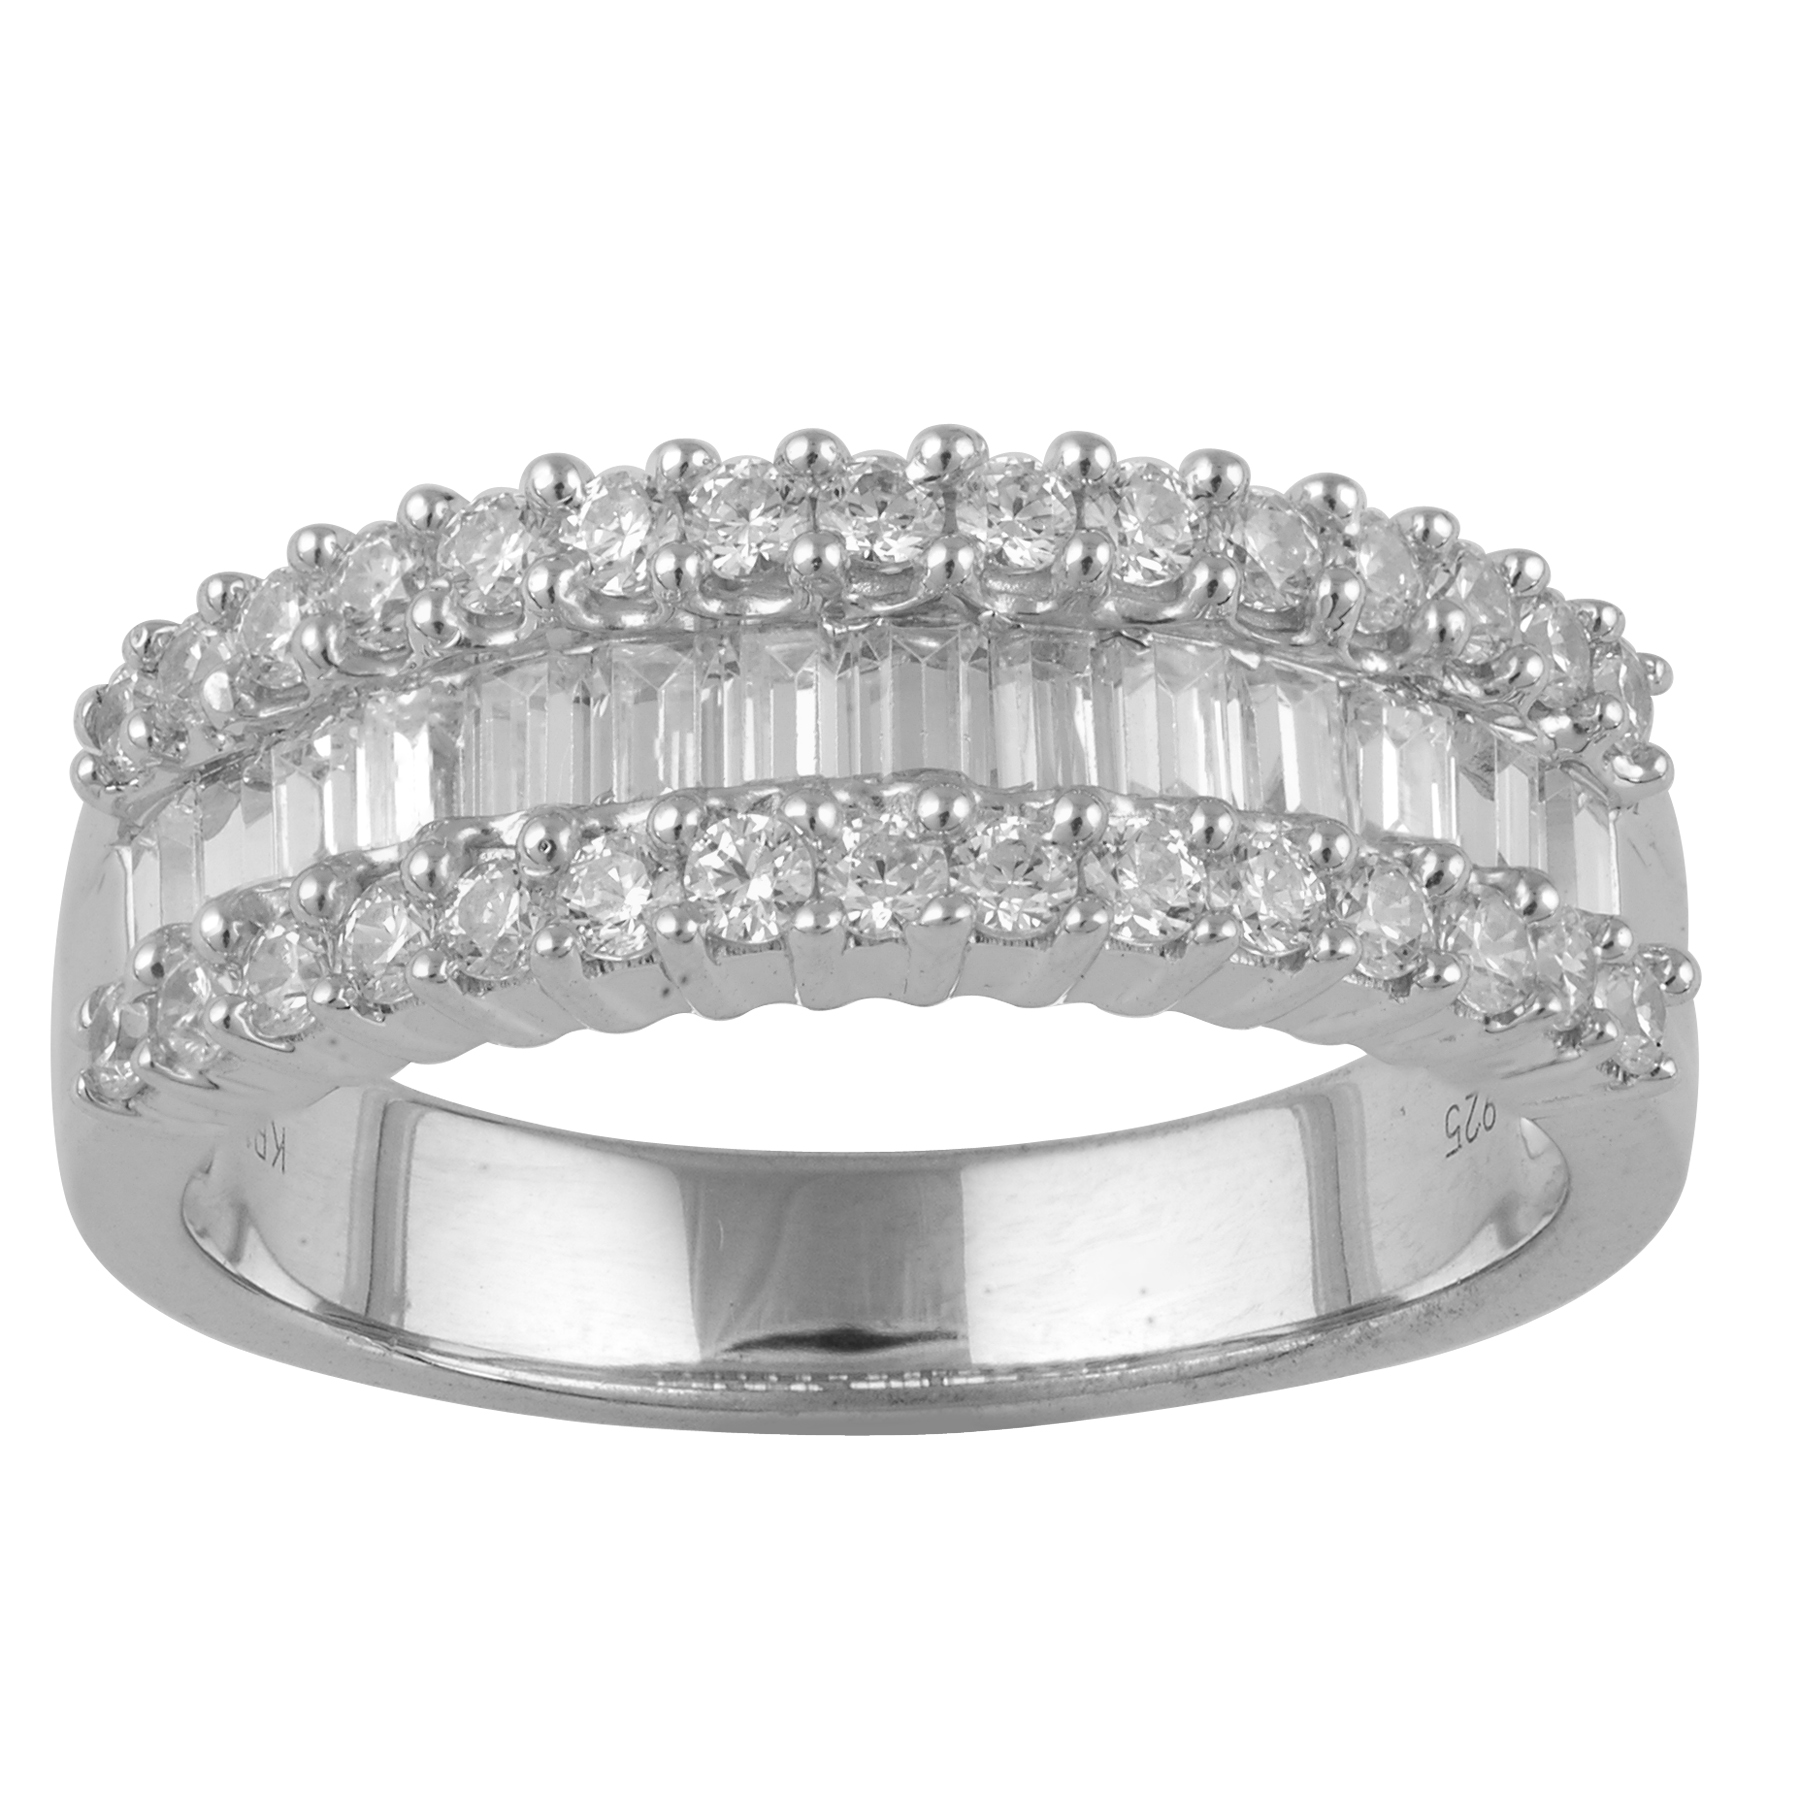 Sterling Silver 1.0 CTTTW Diamond Band Ring